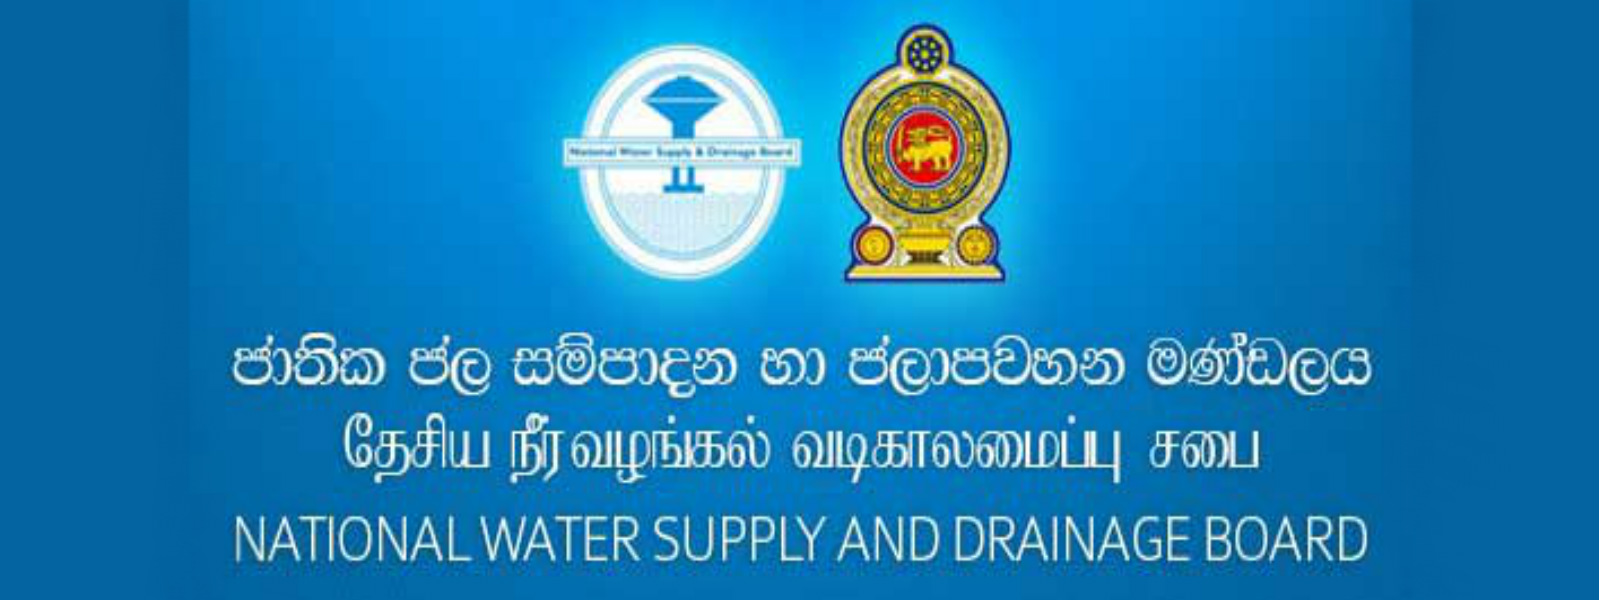 24hour water cut for most areas of Colombo tonight